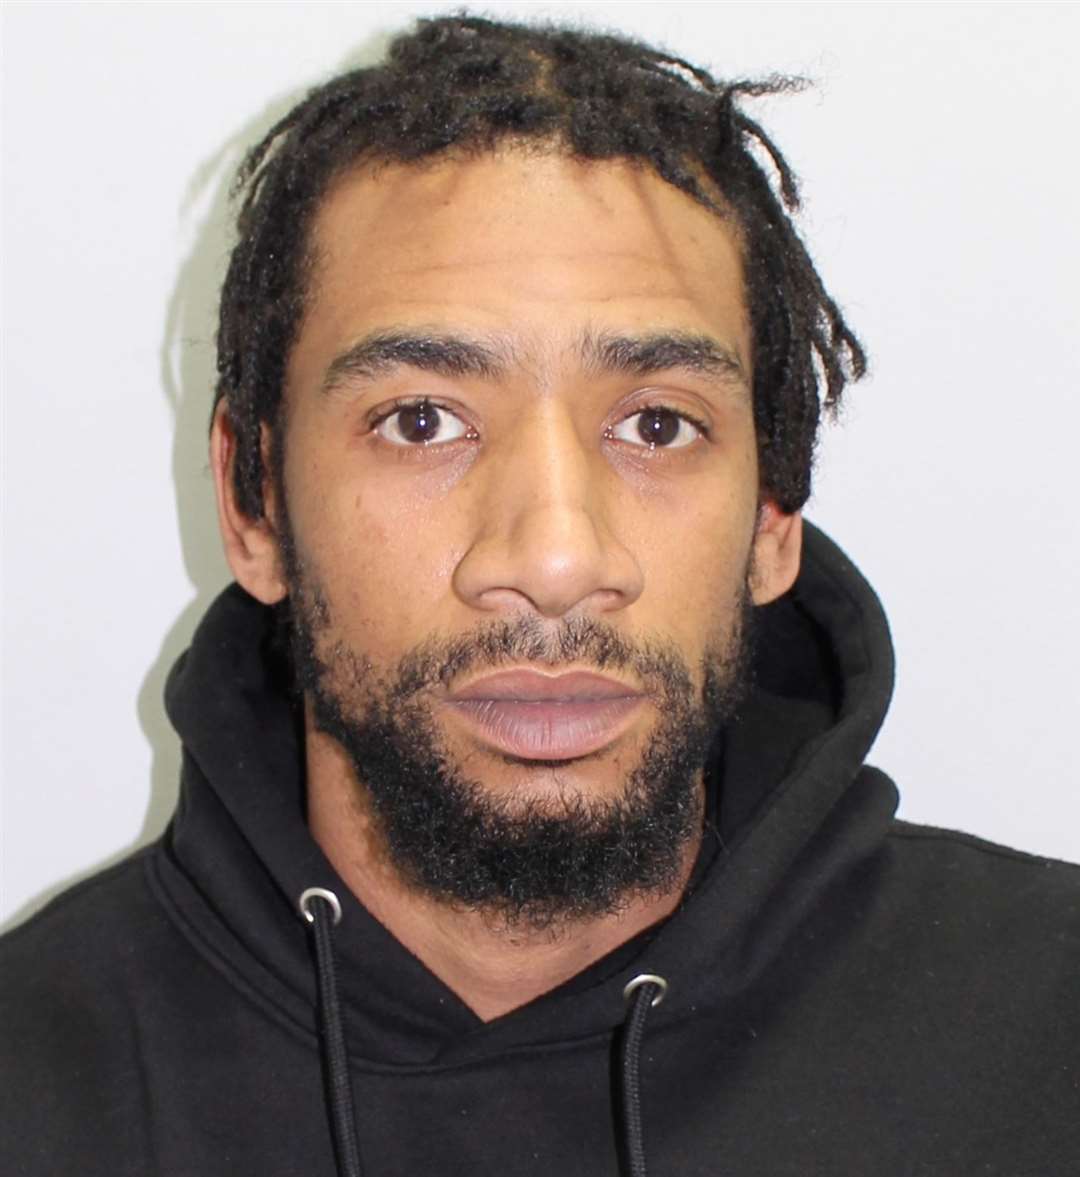 Theo Brown, 32, of Horsham, West Sussex, was found guilty of perverting the course of justice for his role in disposing of the car used in the murder